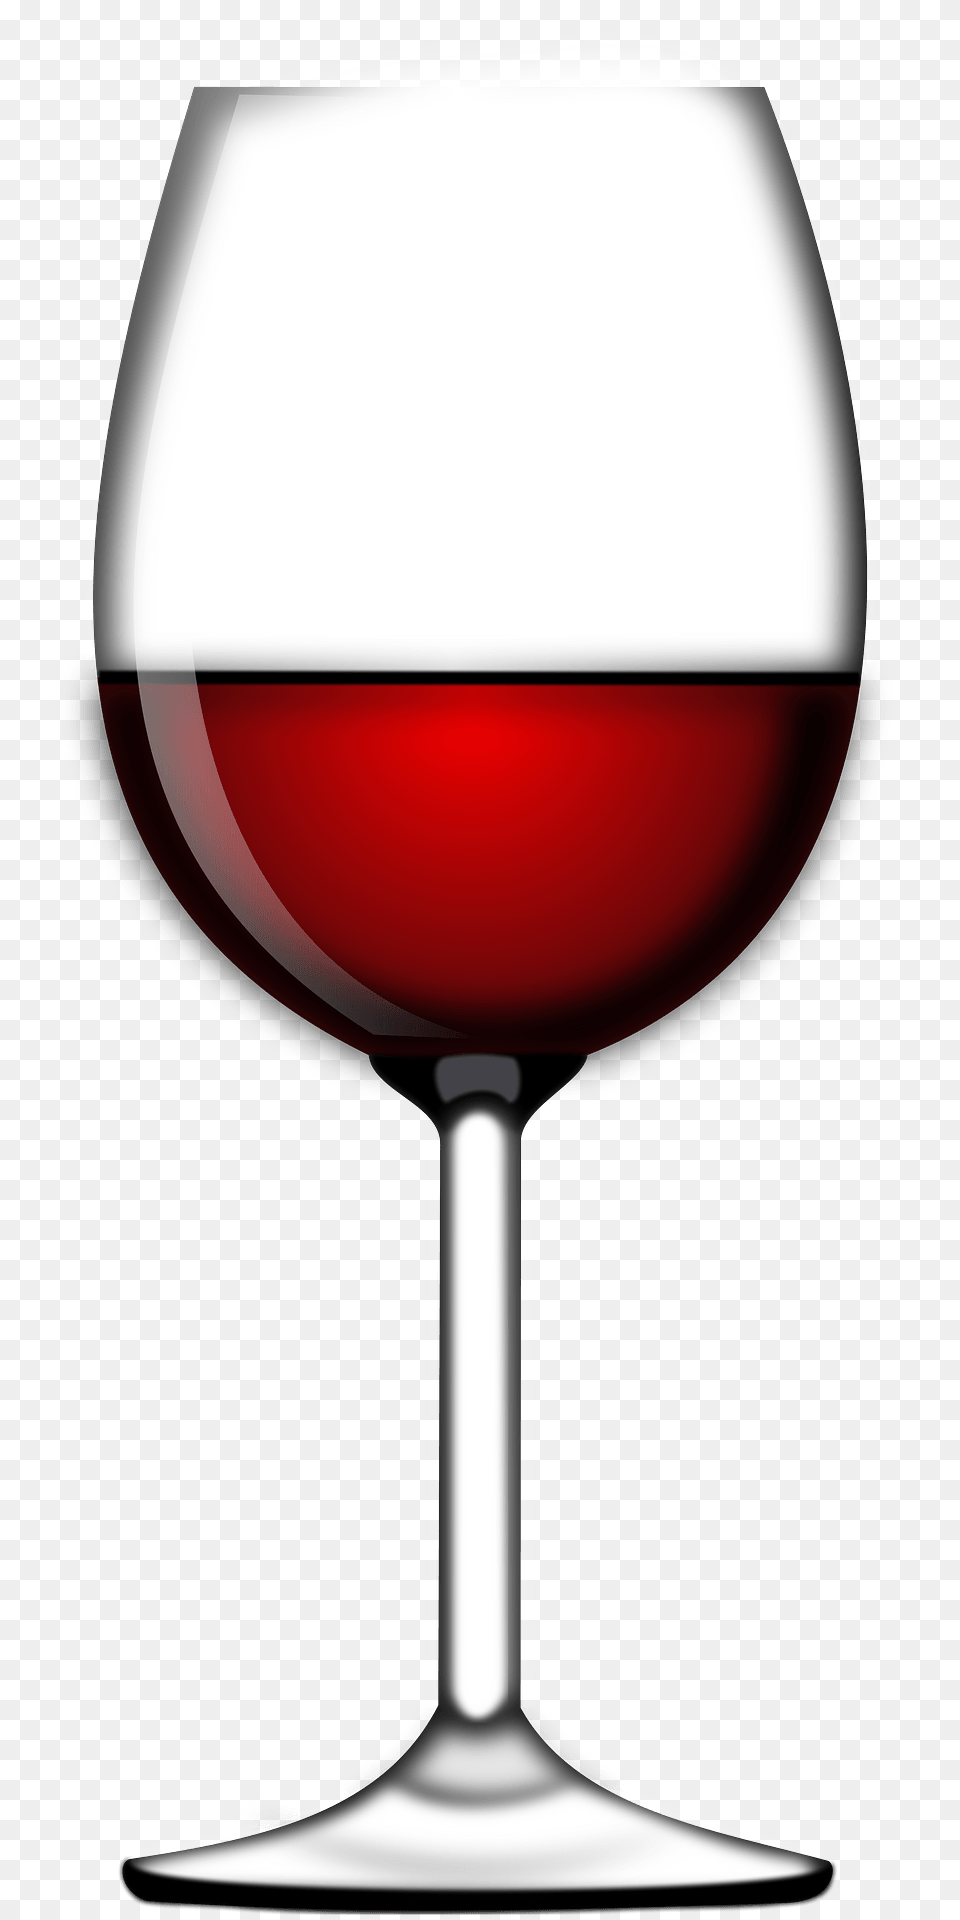 Glass Of Wine Clipart, Alcohol, Red Wine, Liquor, Wine Glass Png Image